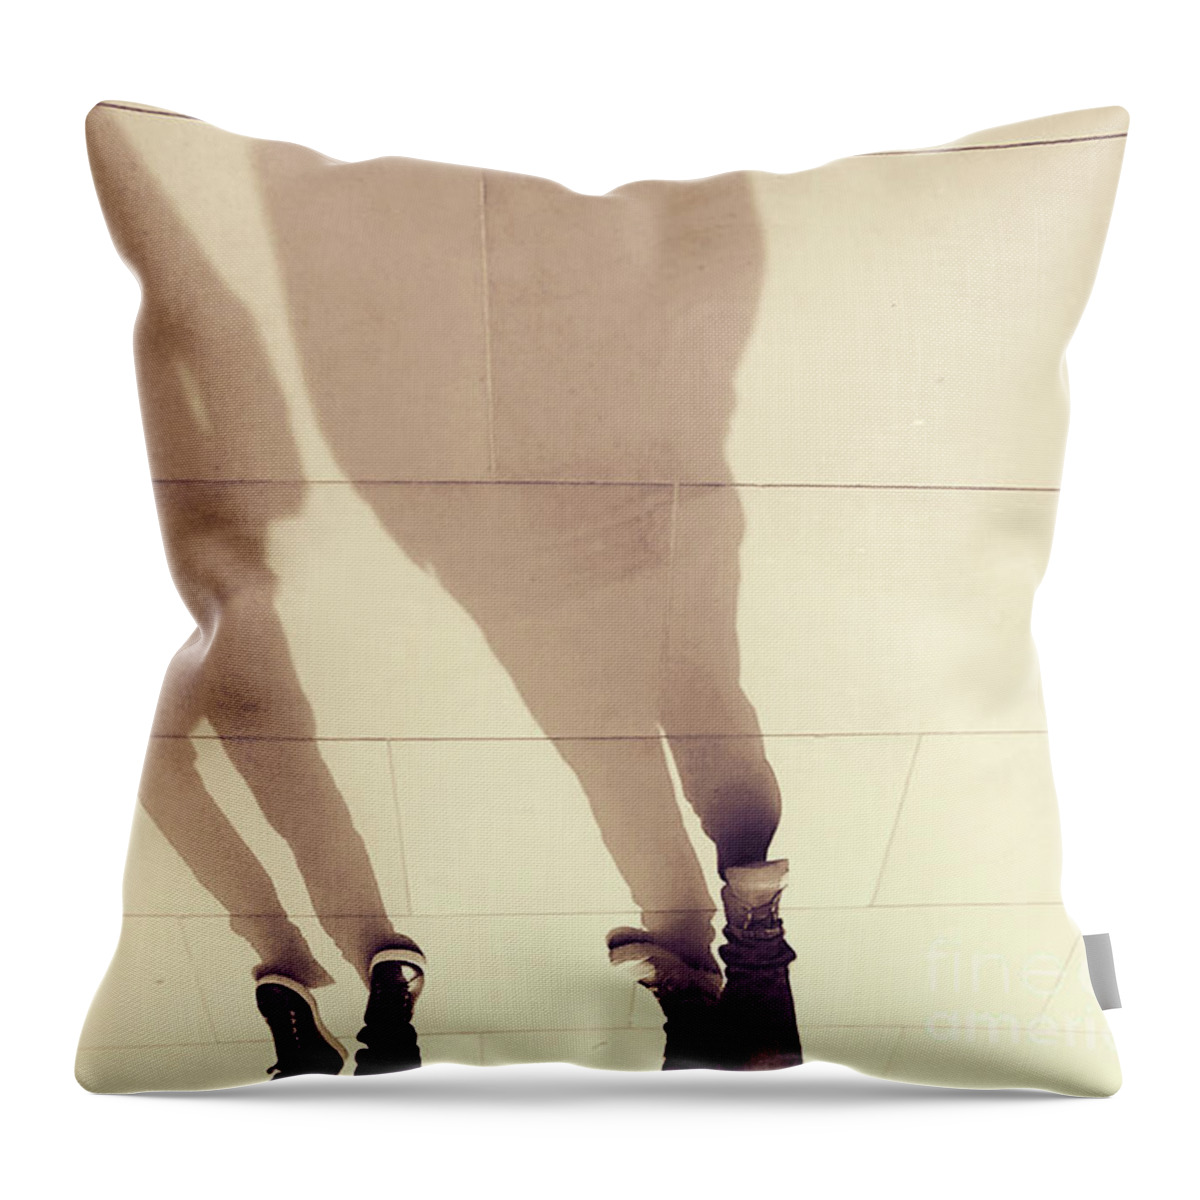 Street Photography Throw Pillow featuring the photograph The Golden Path - Shadows by Rebecca Harman